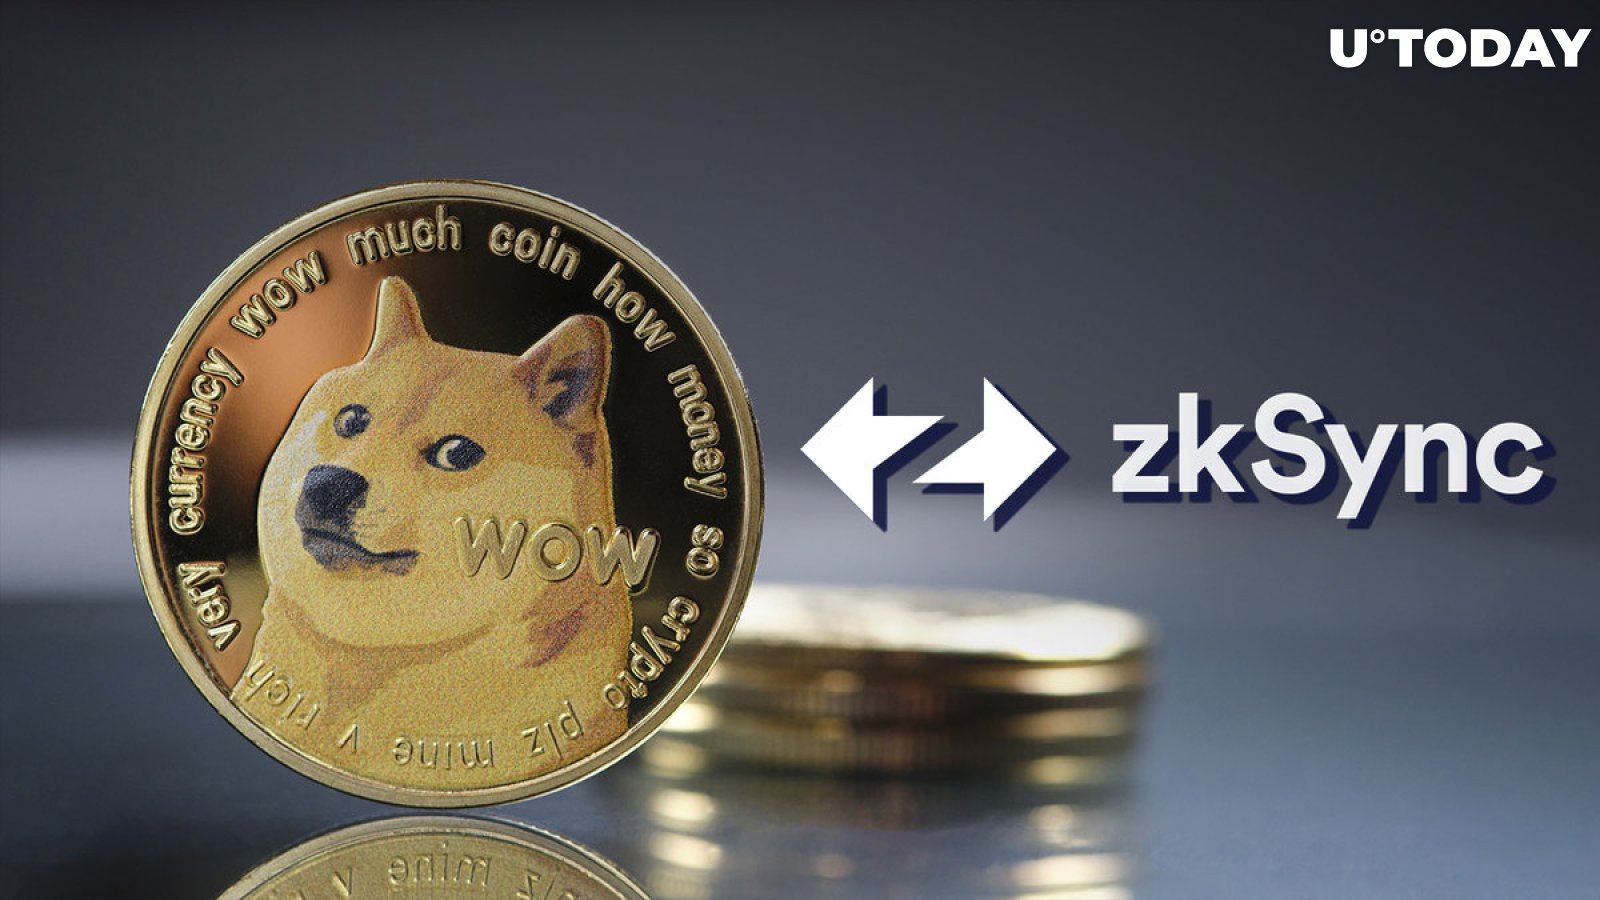 ZkSync Now Has Its Own DOGE: Details